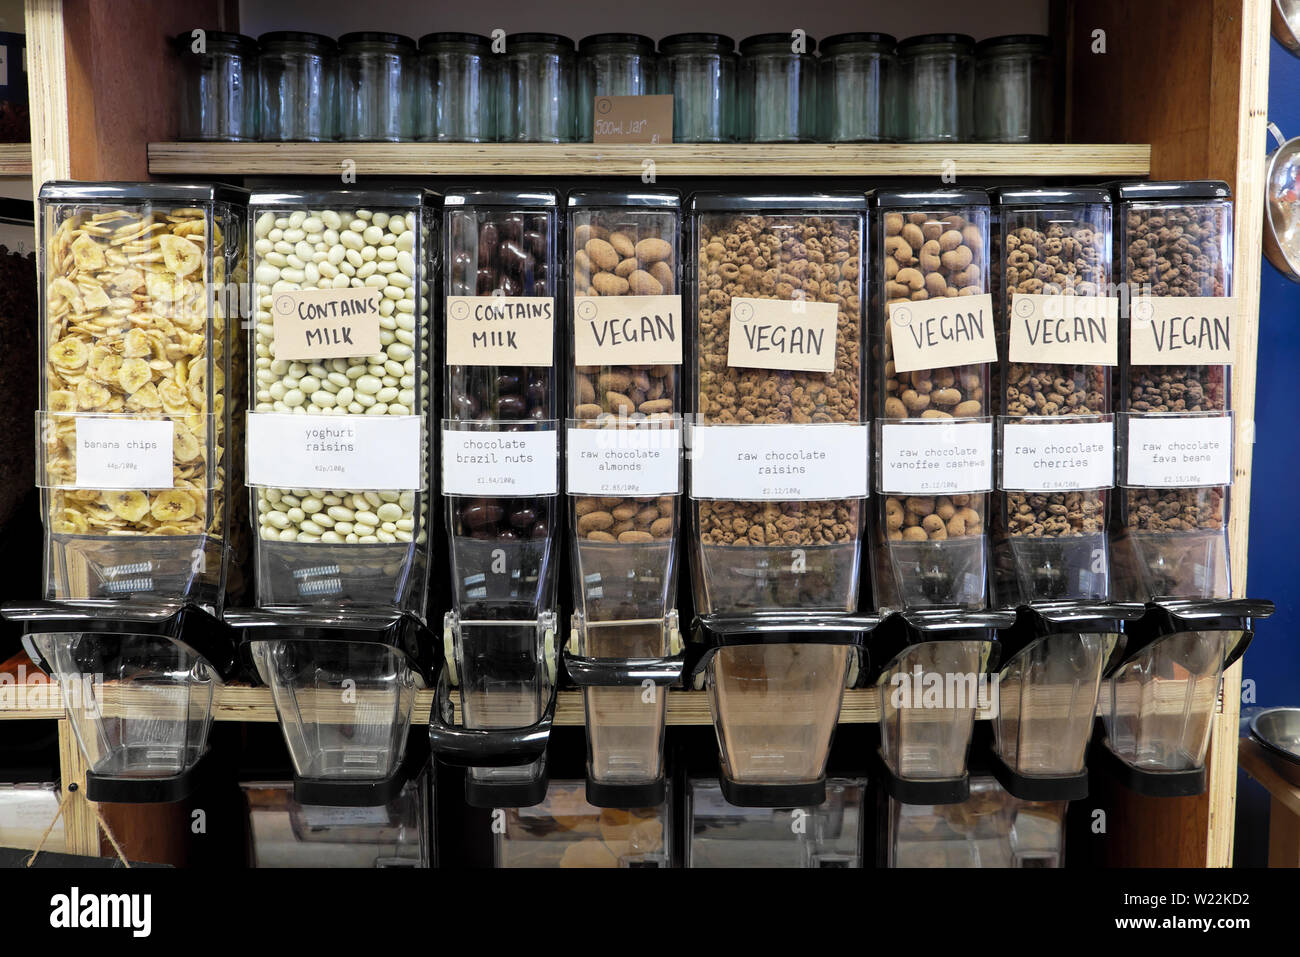 Food containers dispensers for selling loose Vegan nuts, grains, pulses on shelf inside zero waste refill shop interior Cardiff Wales UK  KATHY DEWITT Stock Photo